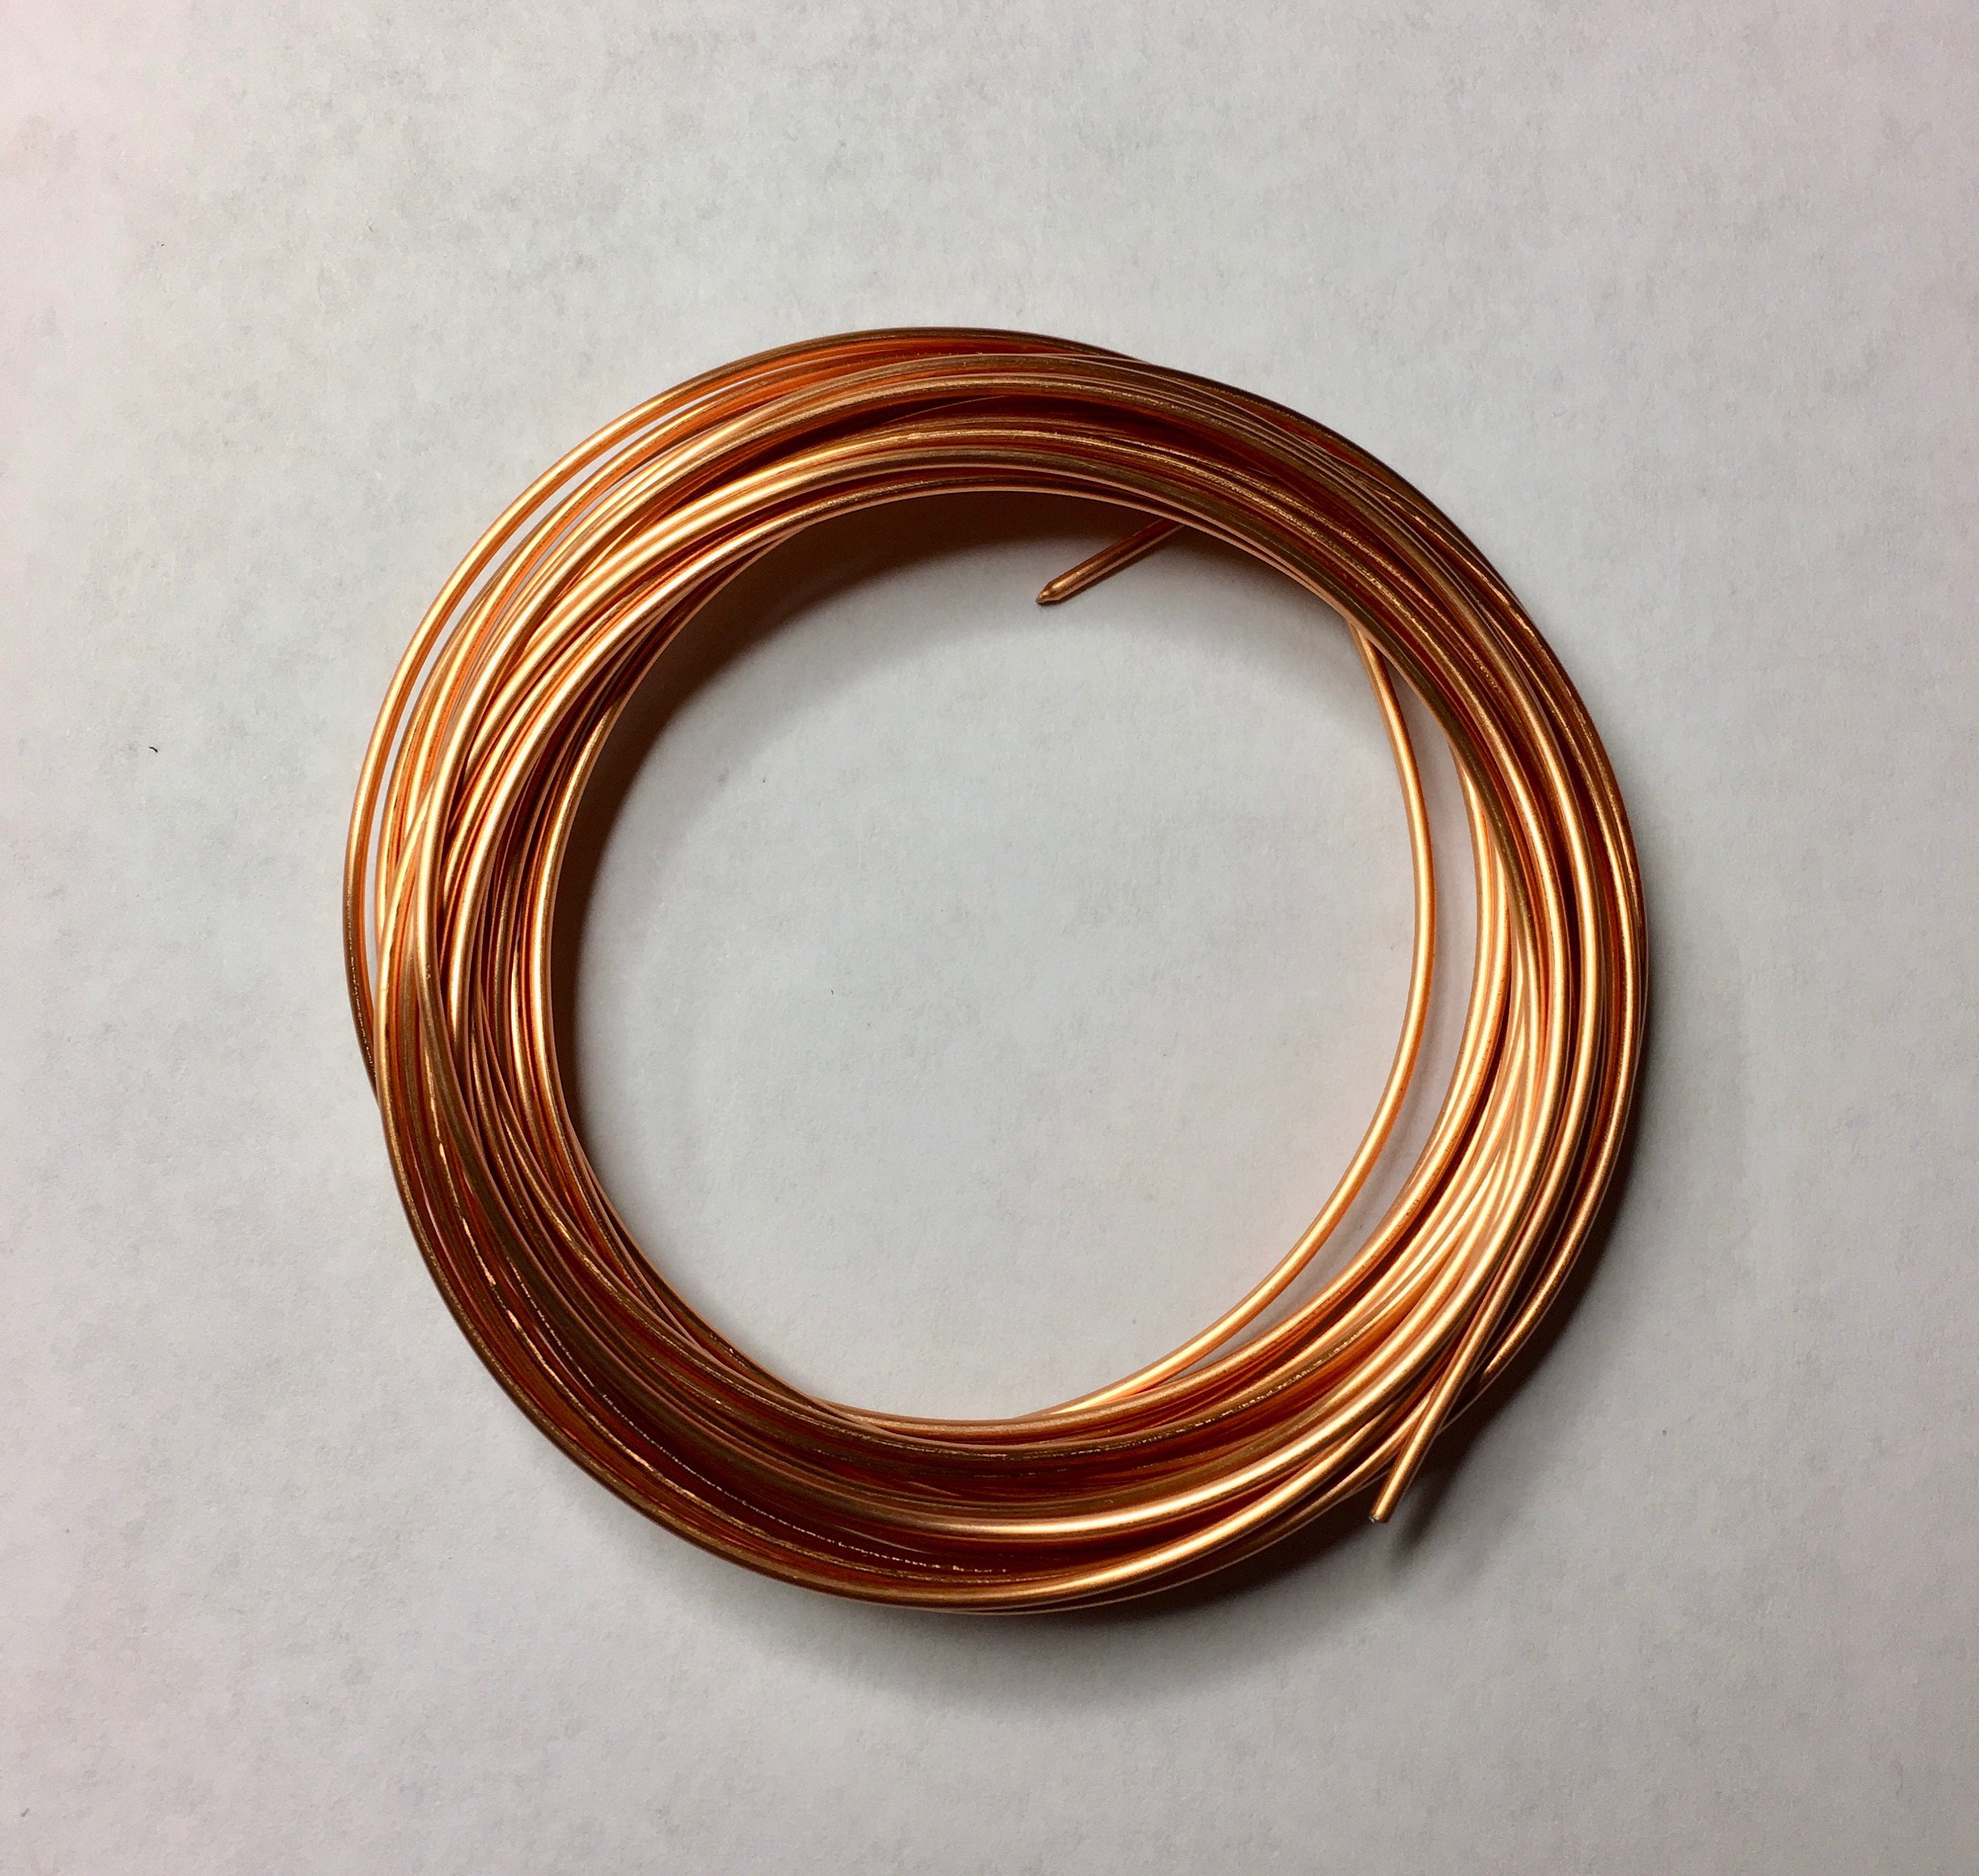 Copper Wire Solid Raw Metal Dead Soft You Pick Gauge 2, 4, 6, 8, 10, 12,  14, 15, 16, 18, 20, 21, 22, 24, 26, 28, 30, 32, 36 40 